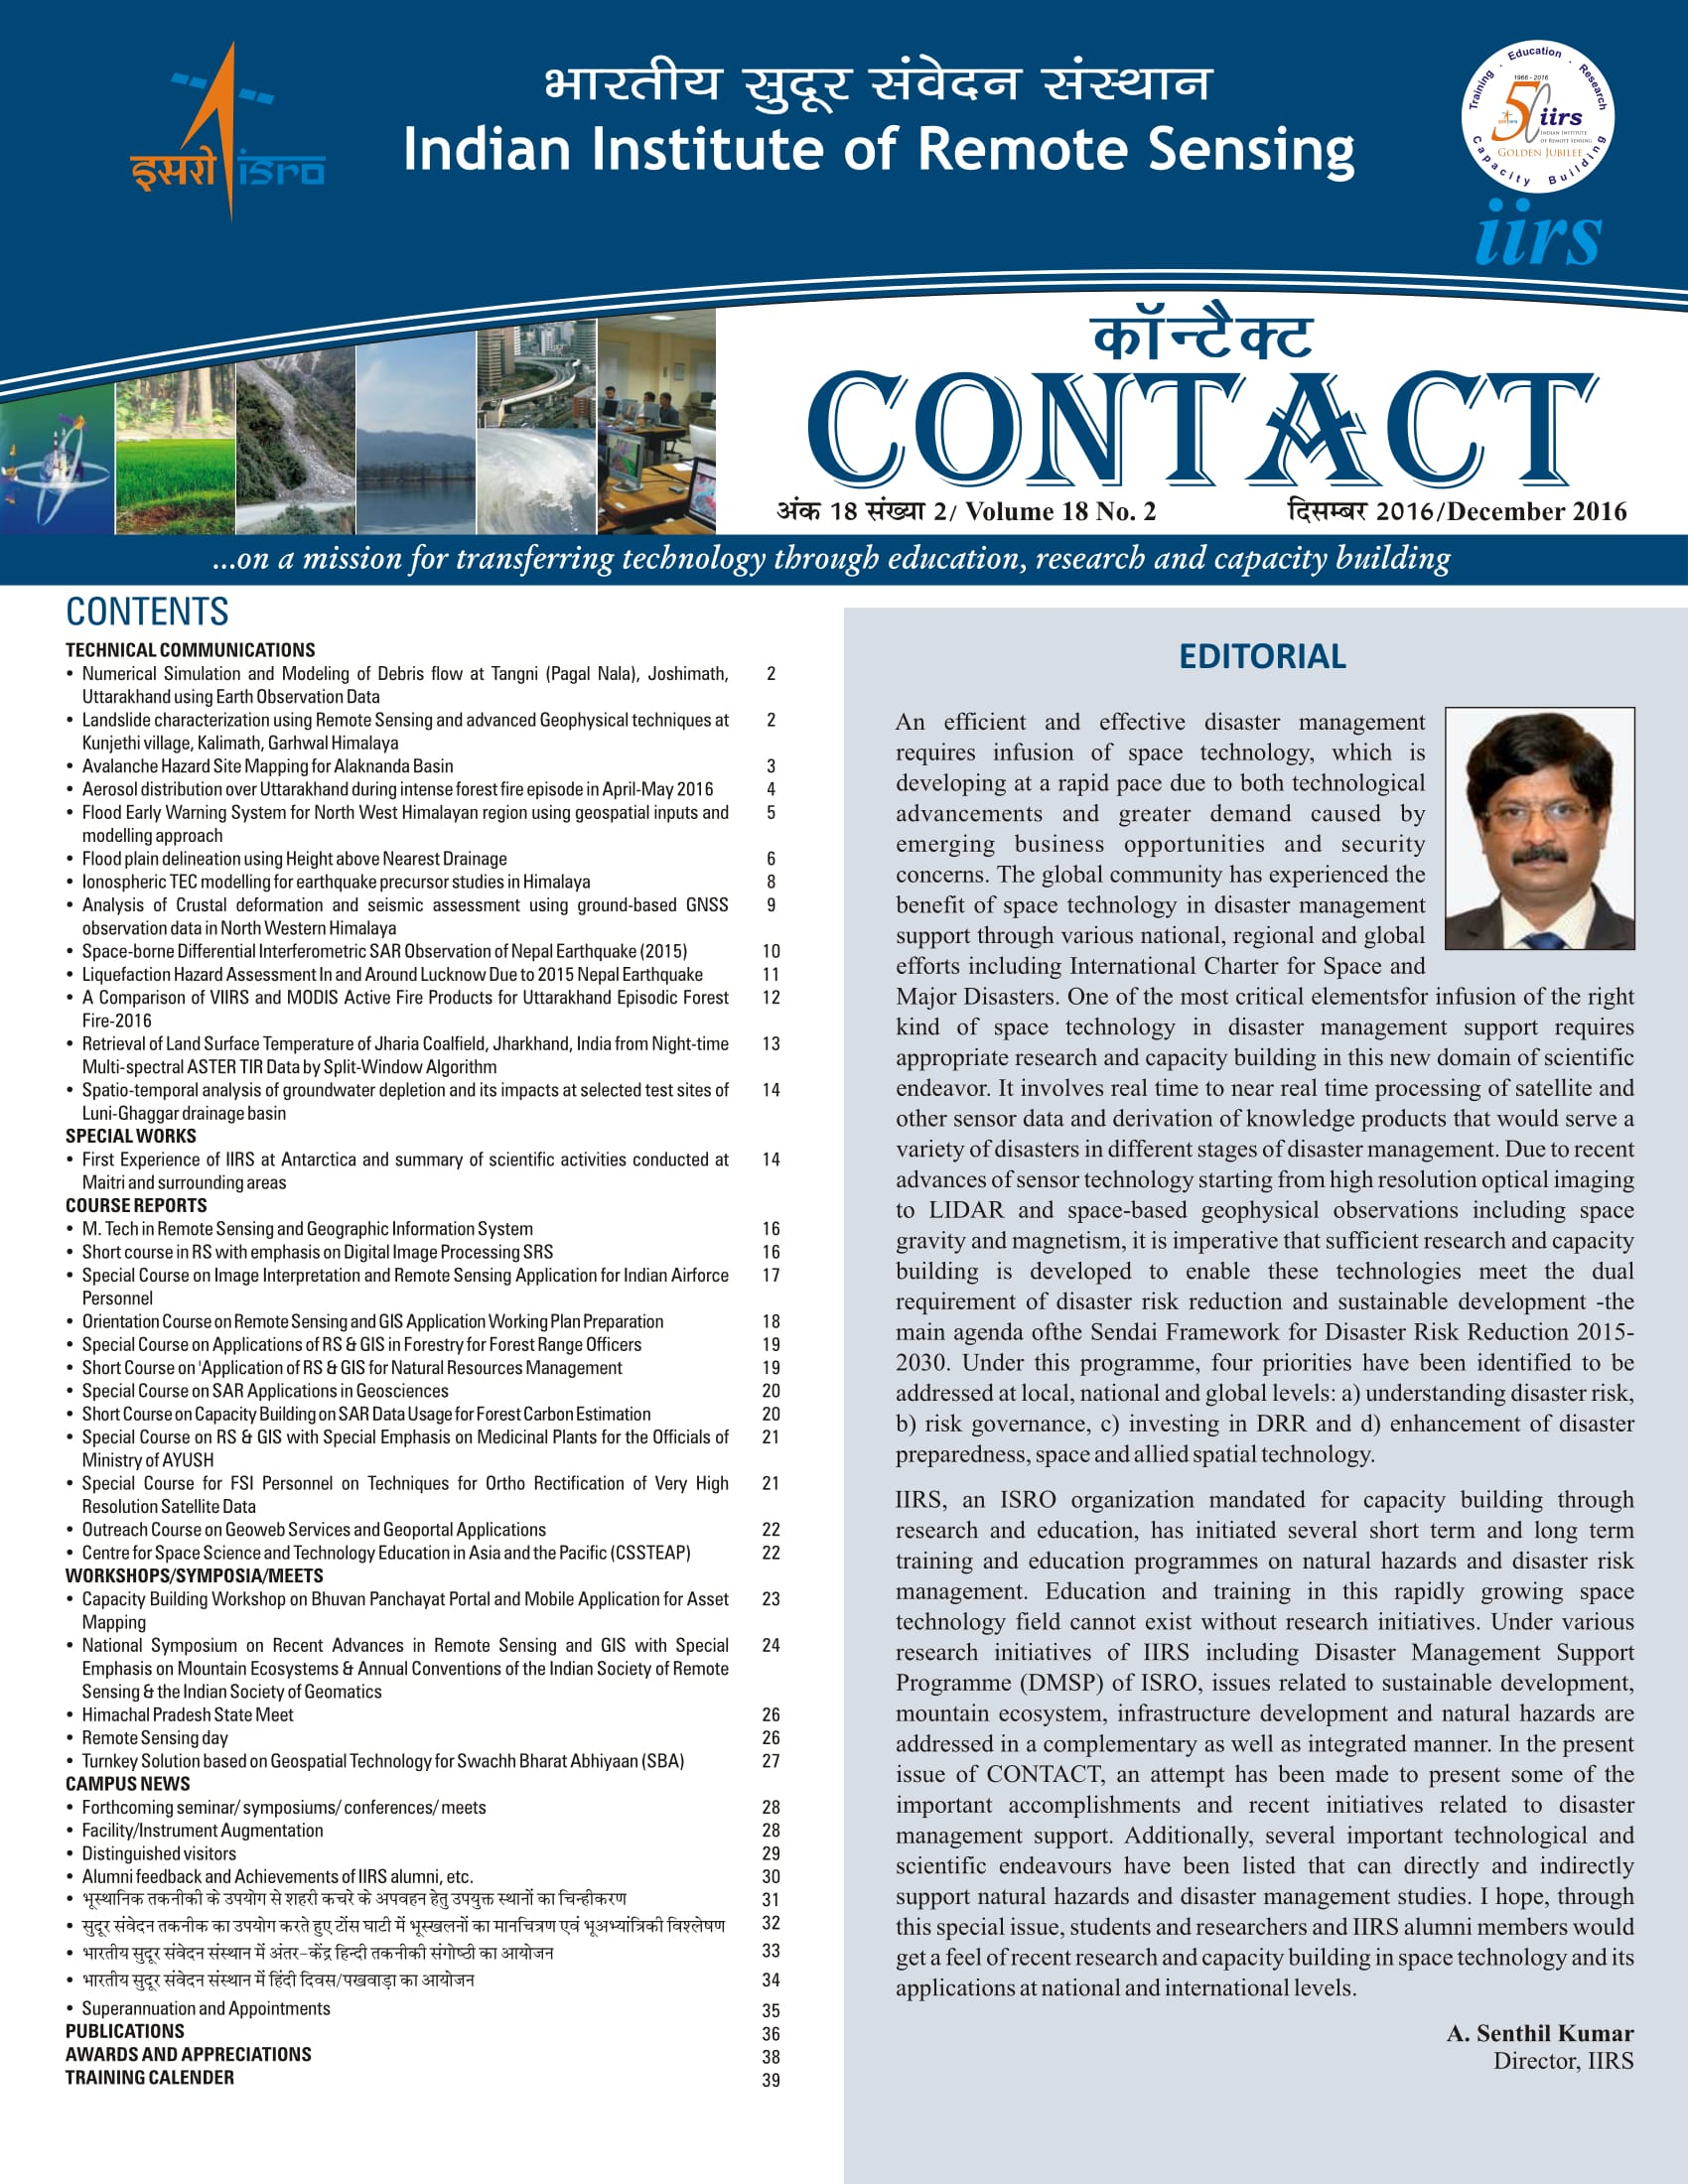 Image of Contact Newsletter December 2016